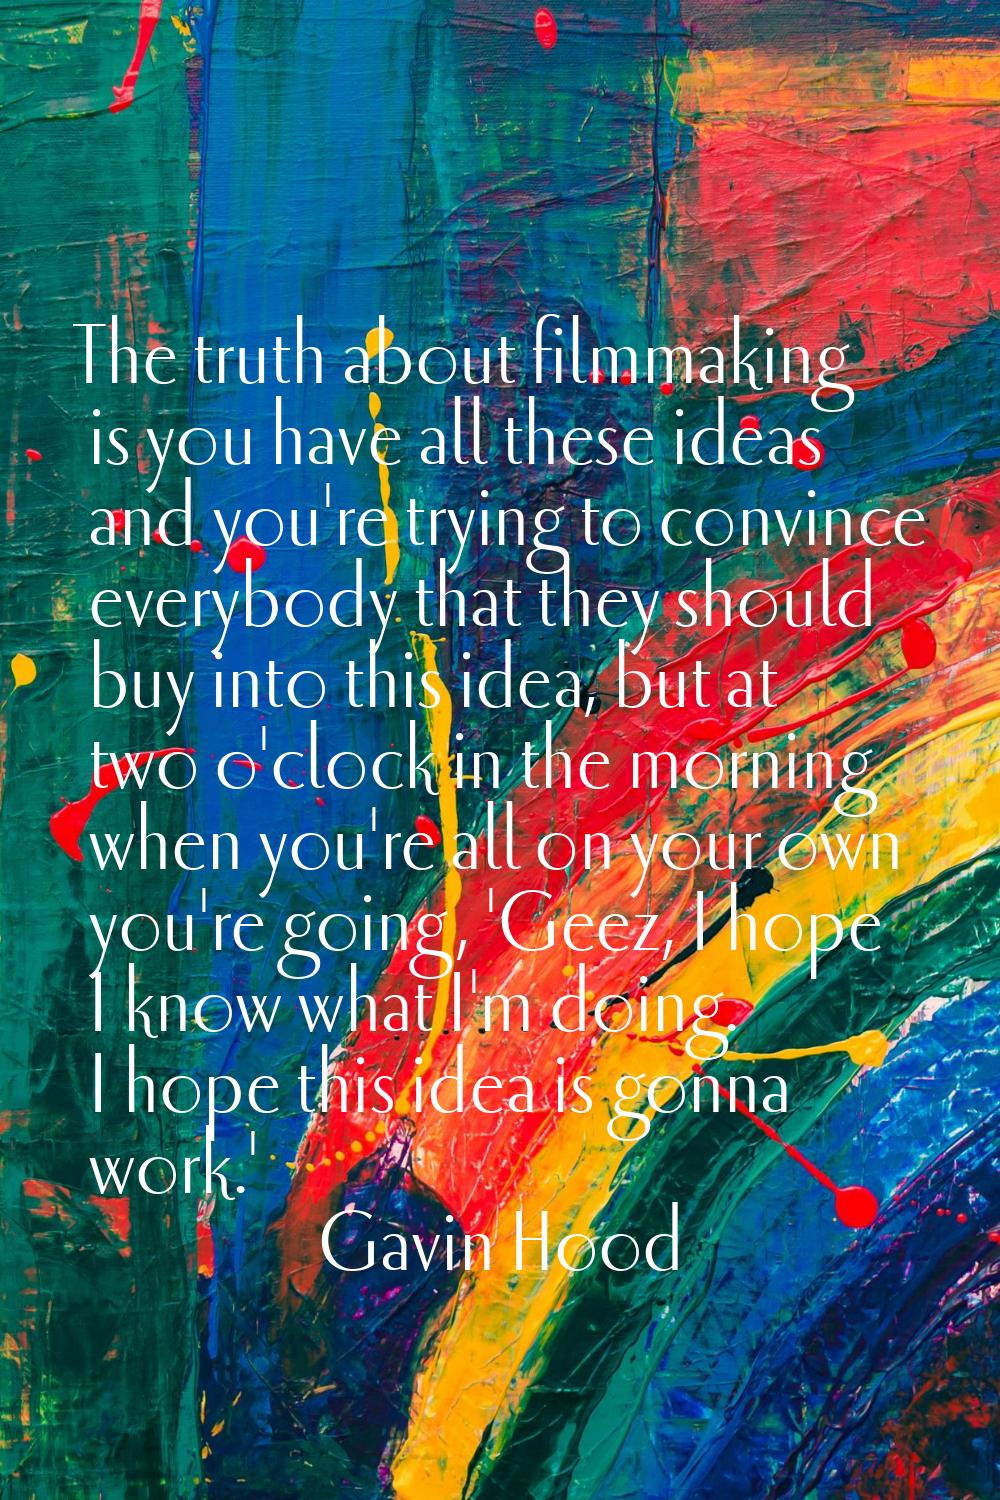 The truth about filmmaking is you have all these ideas and you're trying to convince everybody that